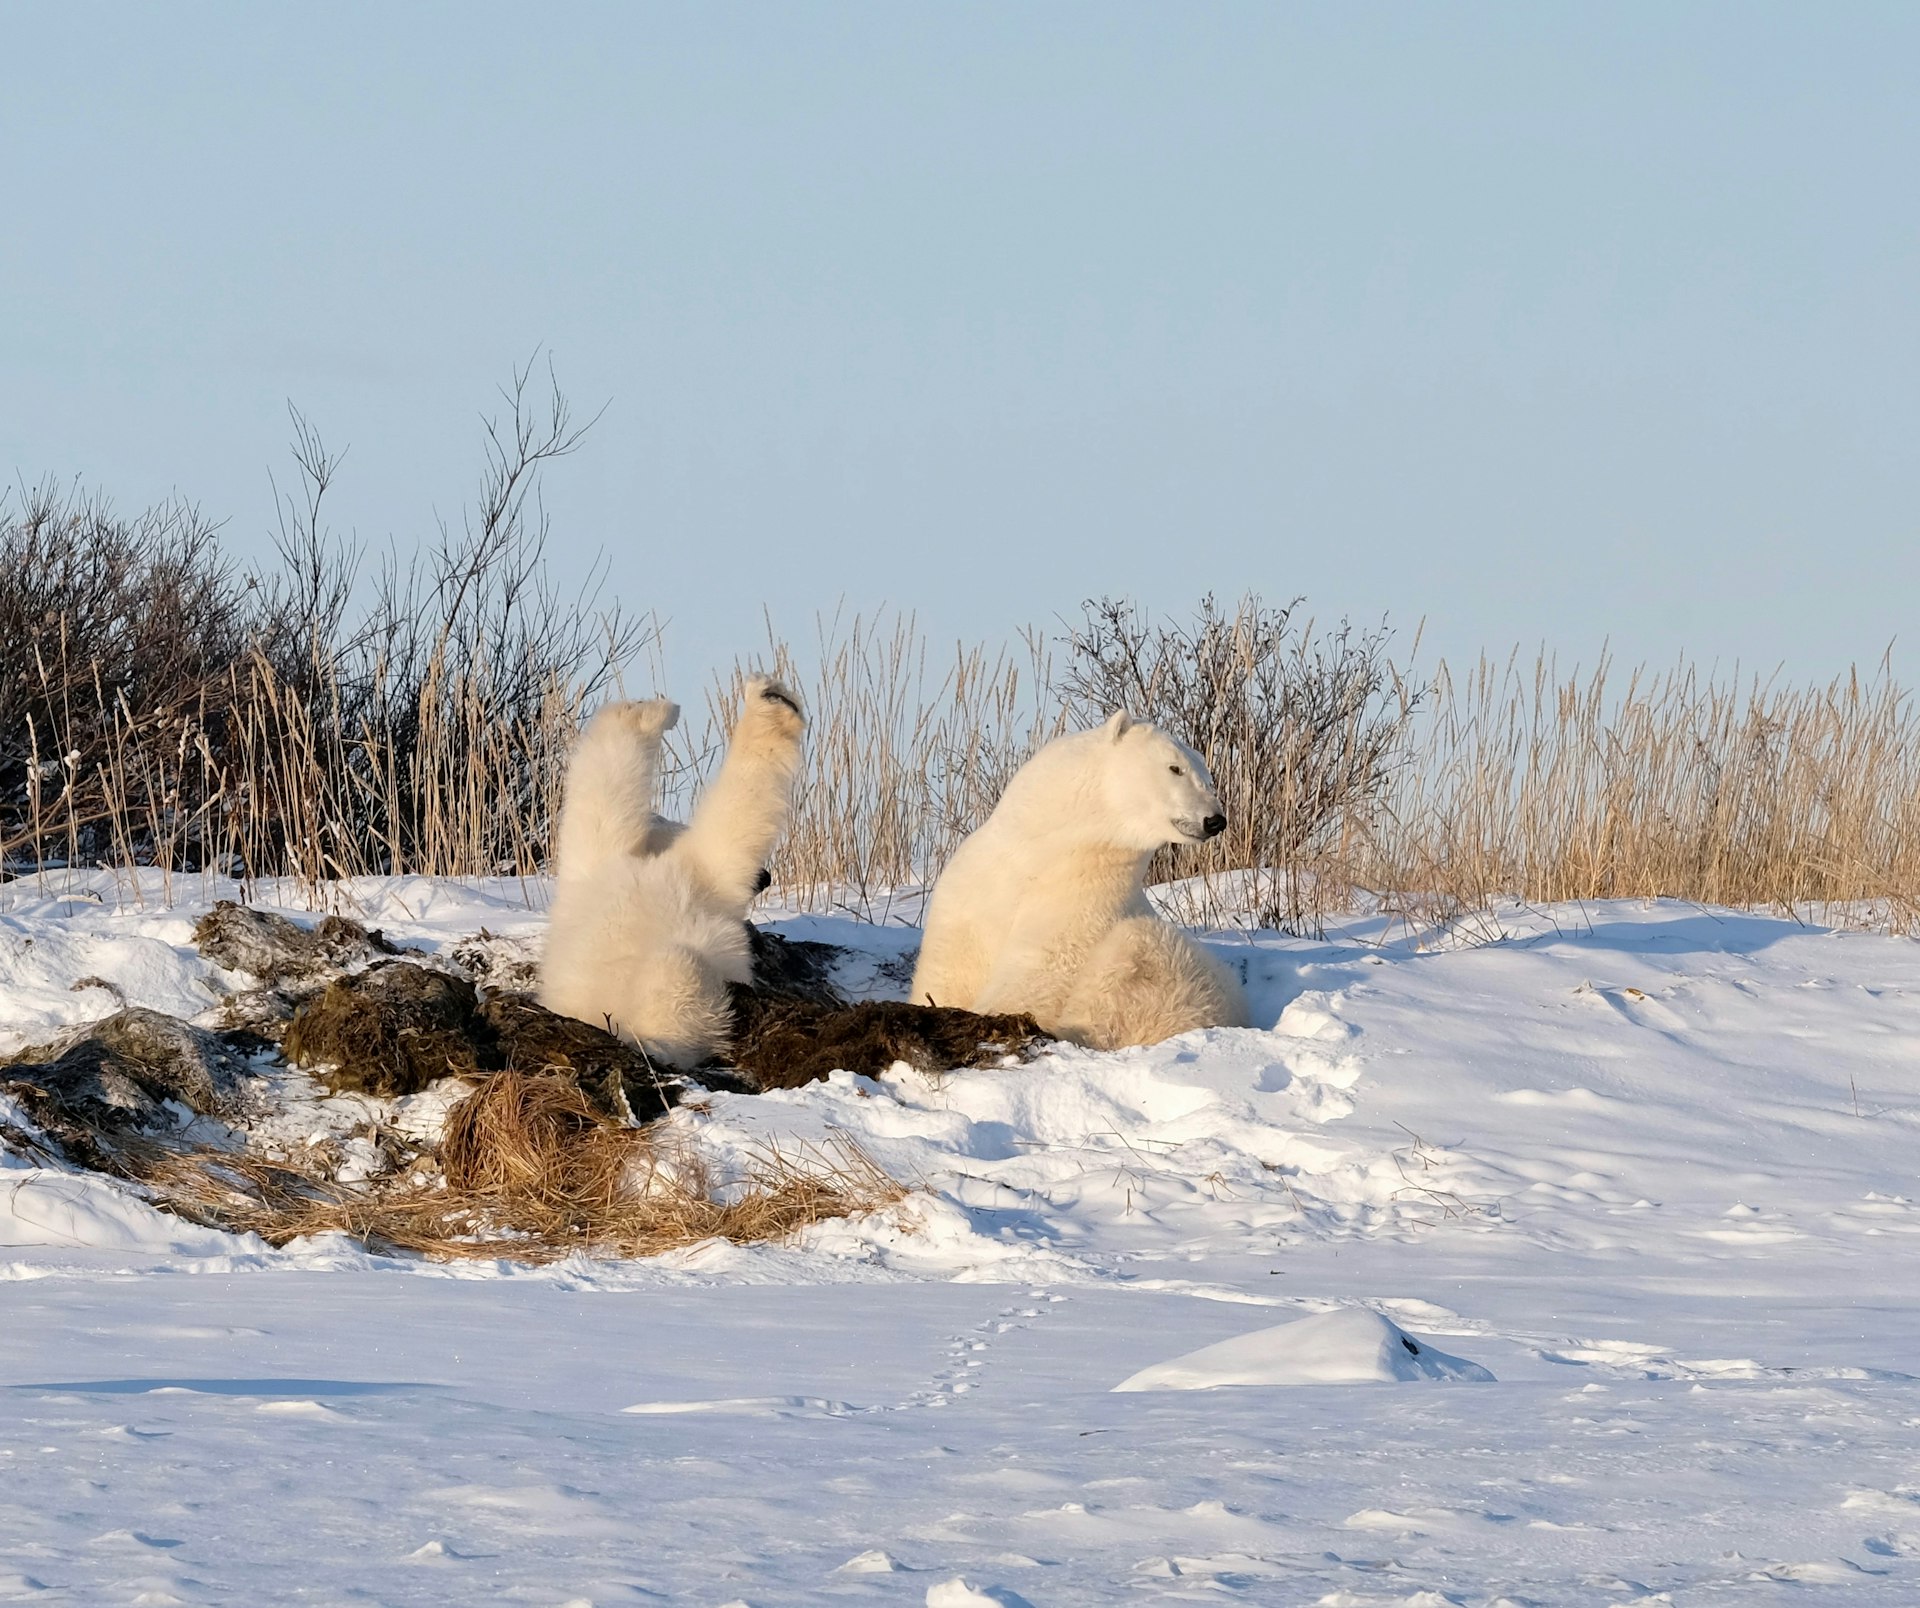 A mother polar bear keeps watch while her cub rolls backward, waving their legs in the air while wriggling in a bank of seaweed, on the snow-covered ground of Churchill, Canada in a nest of seaweed.jpg